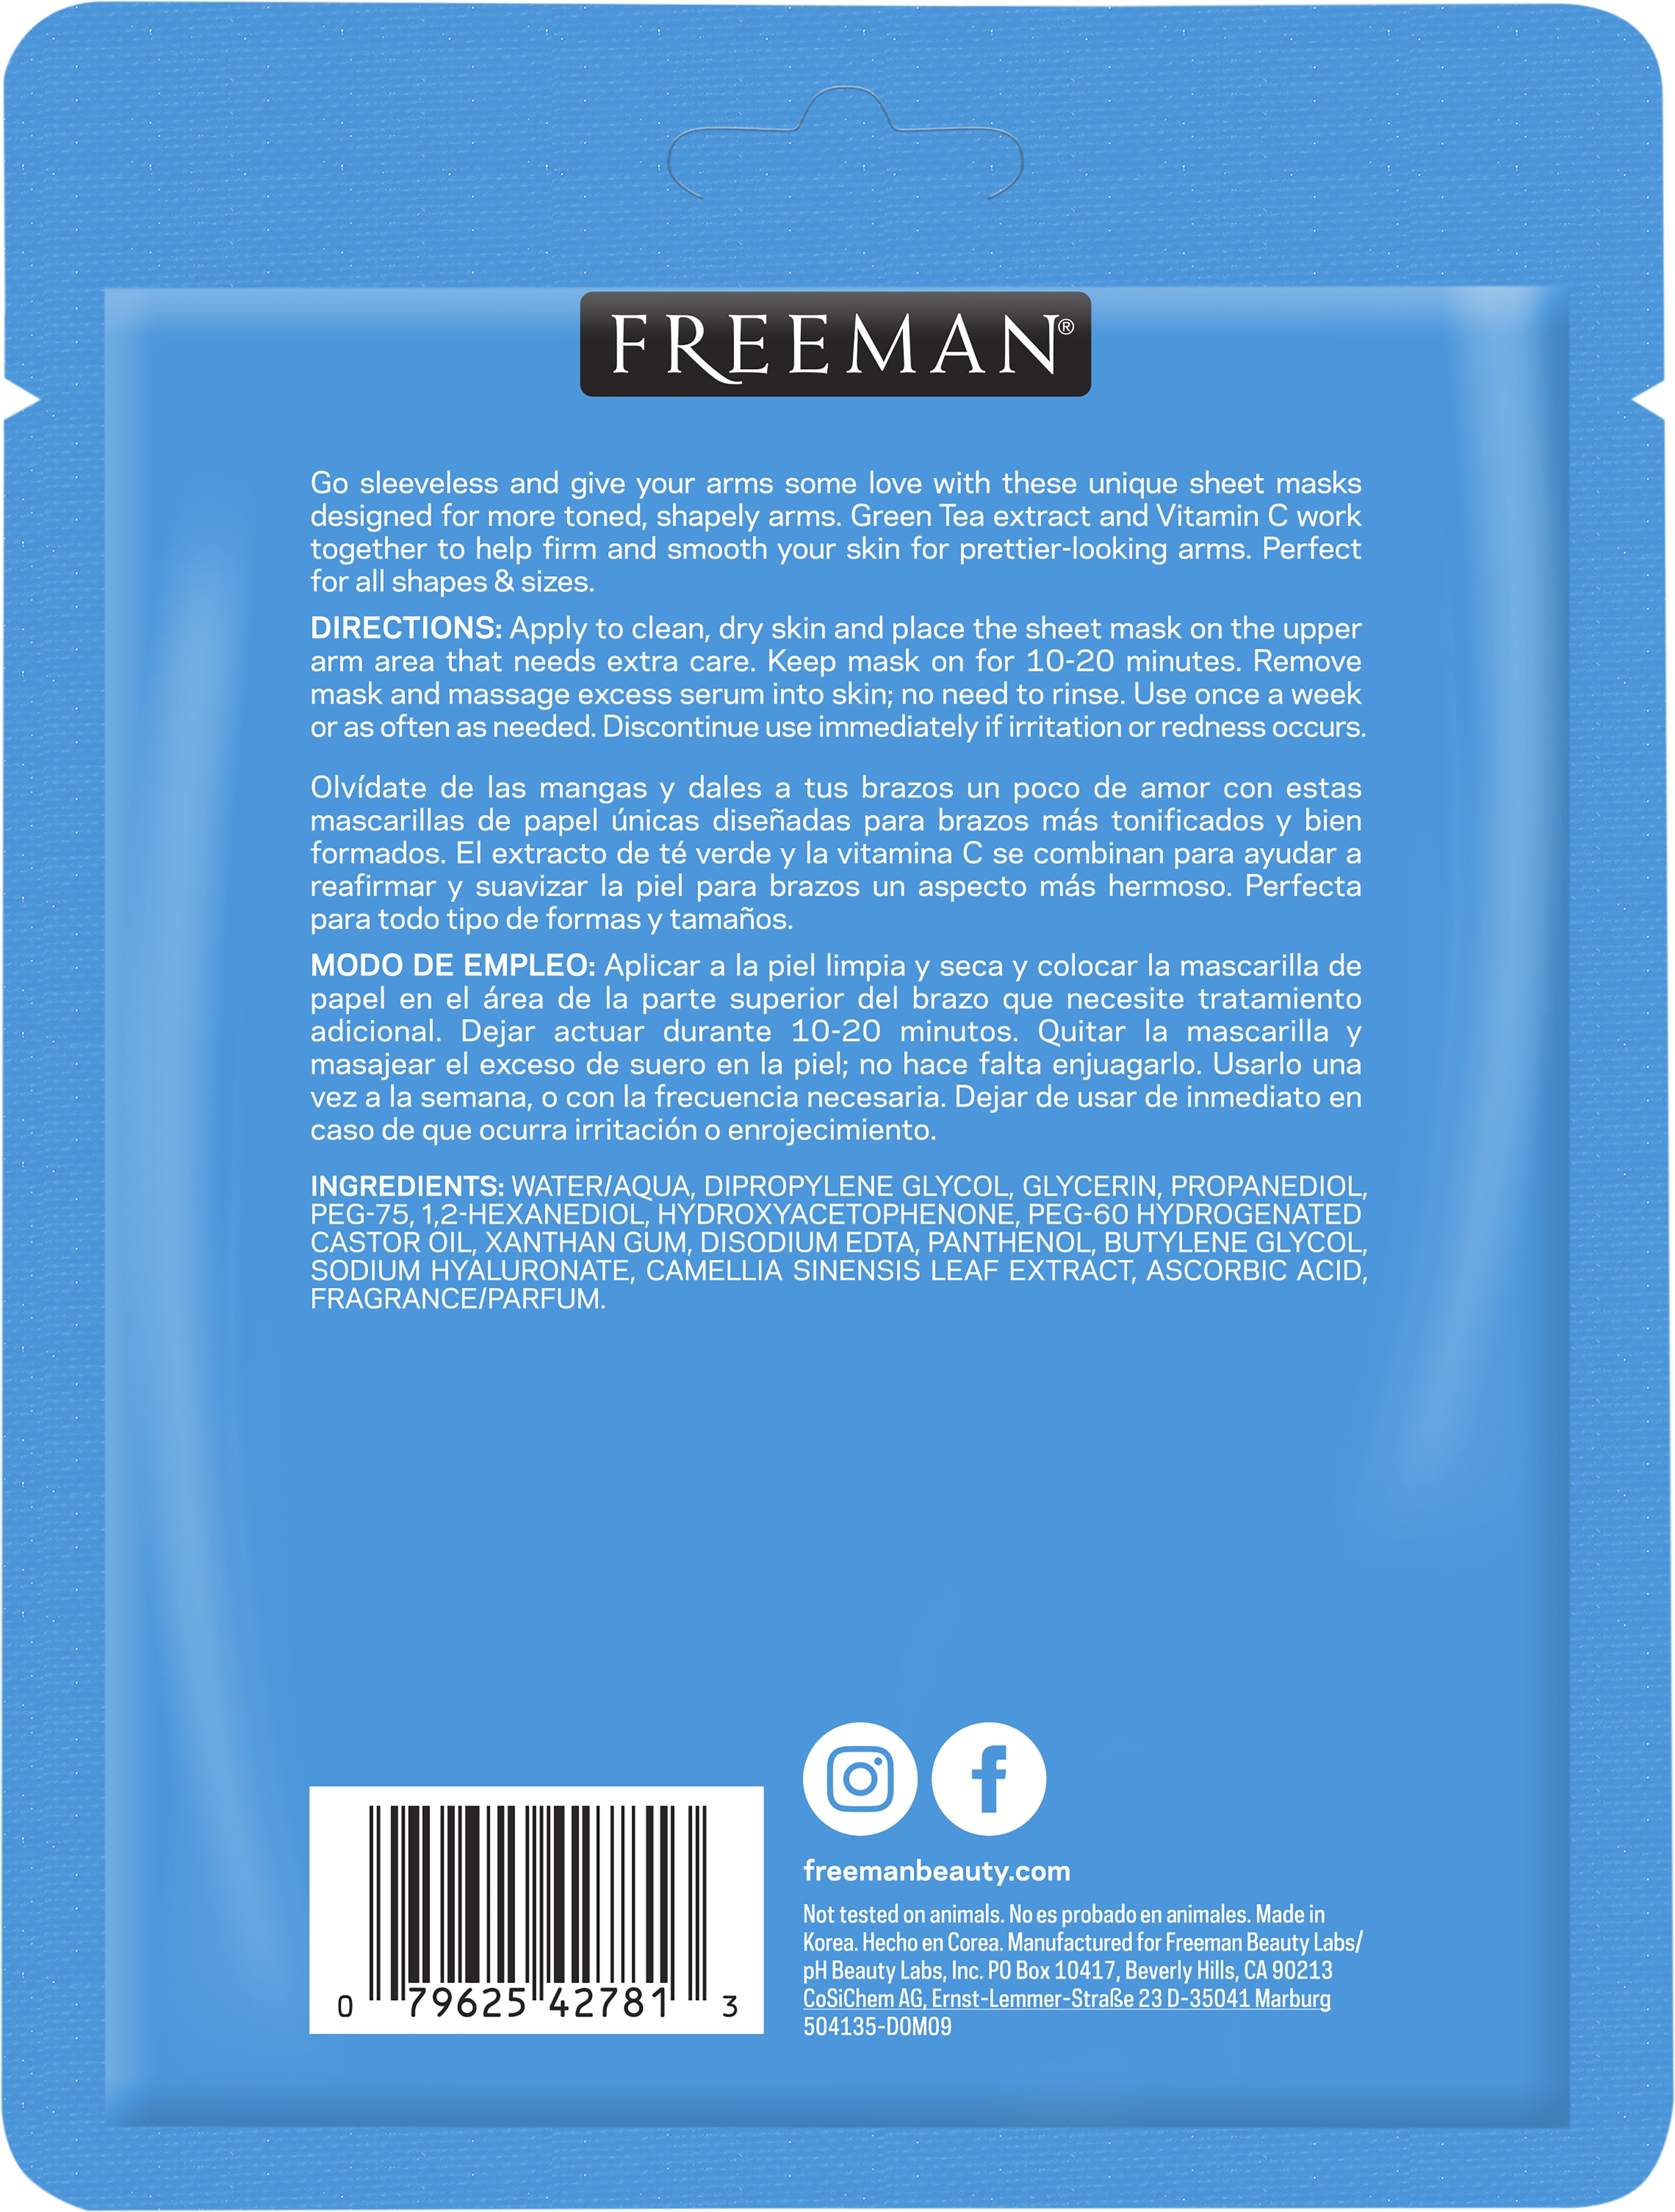 Happy Belly Firming & Smoothing Body Sheet Mask – Freeman Beauty